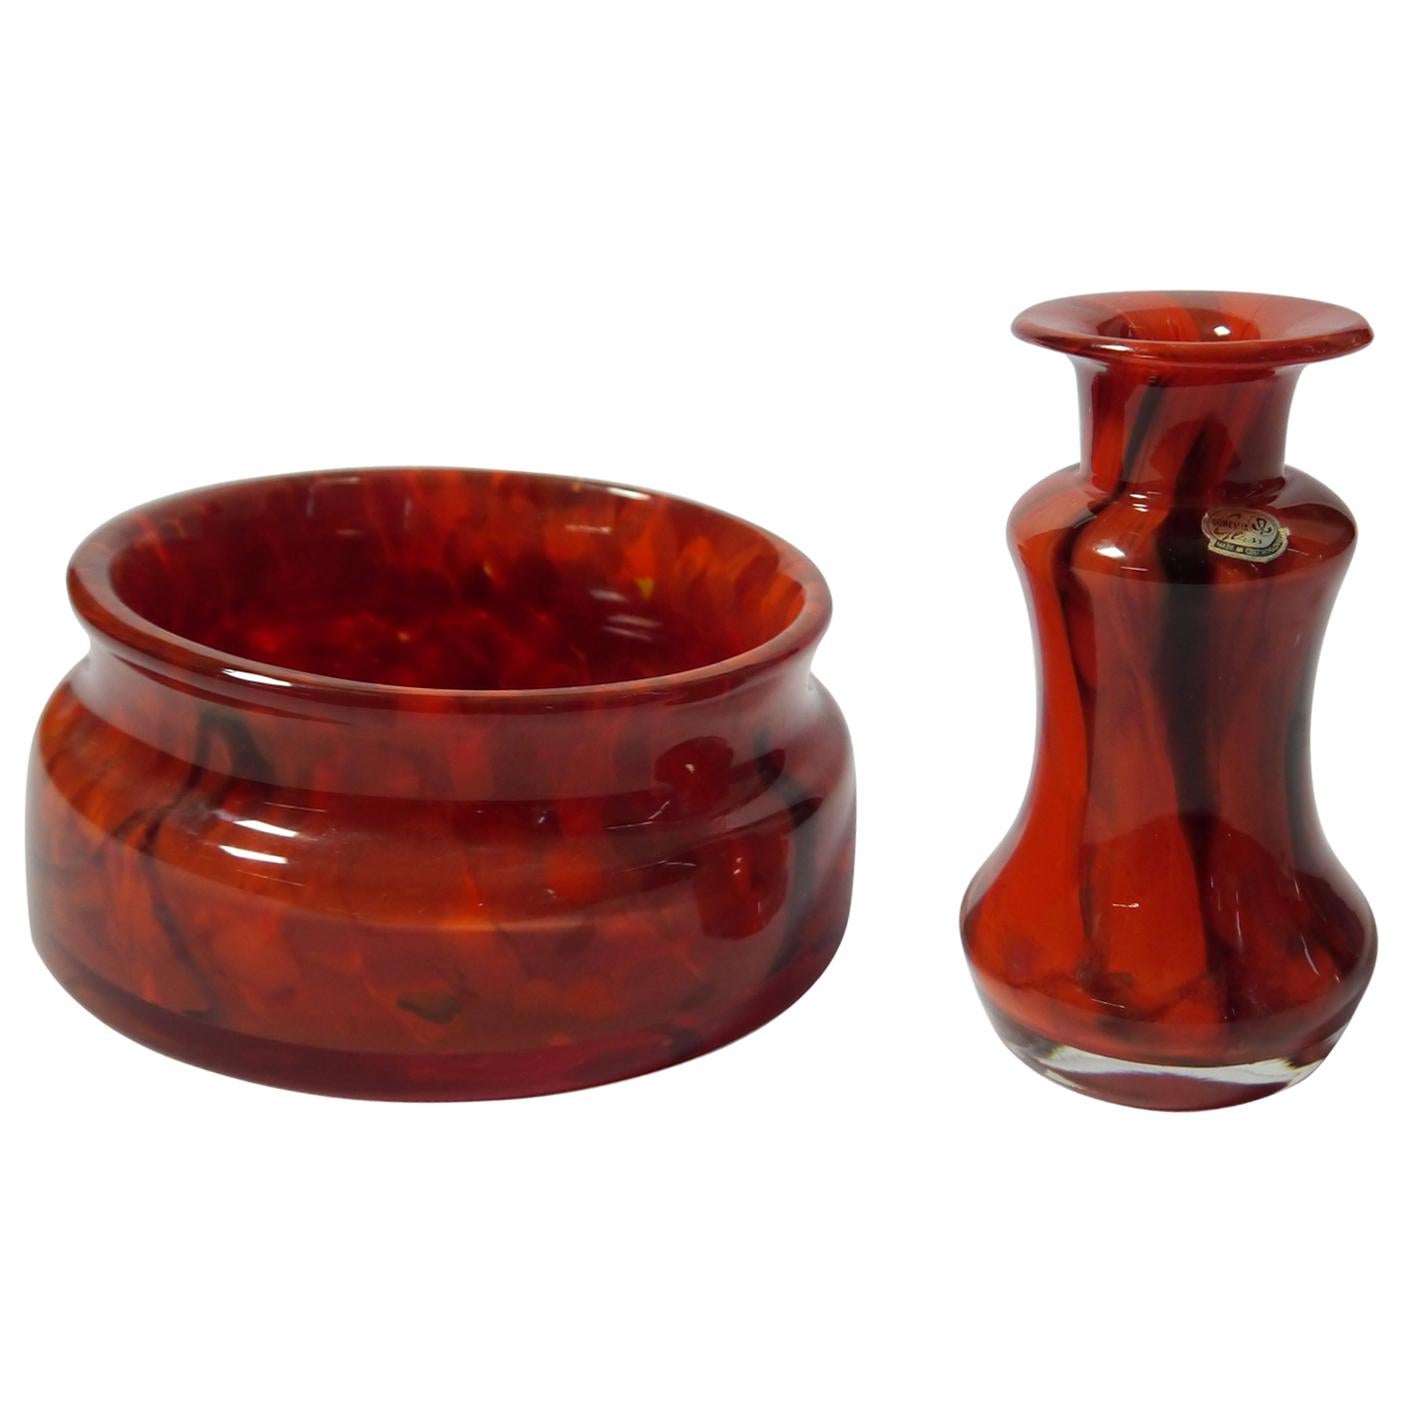 Set of deep ruby red and black art glass vase and bowl made by Bohemia Glass, Czechoslovakia 1960s. Vase features original sticker.